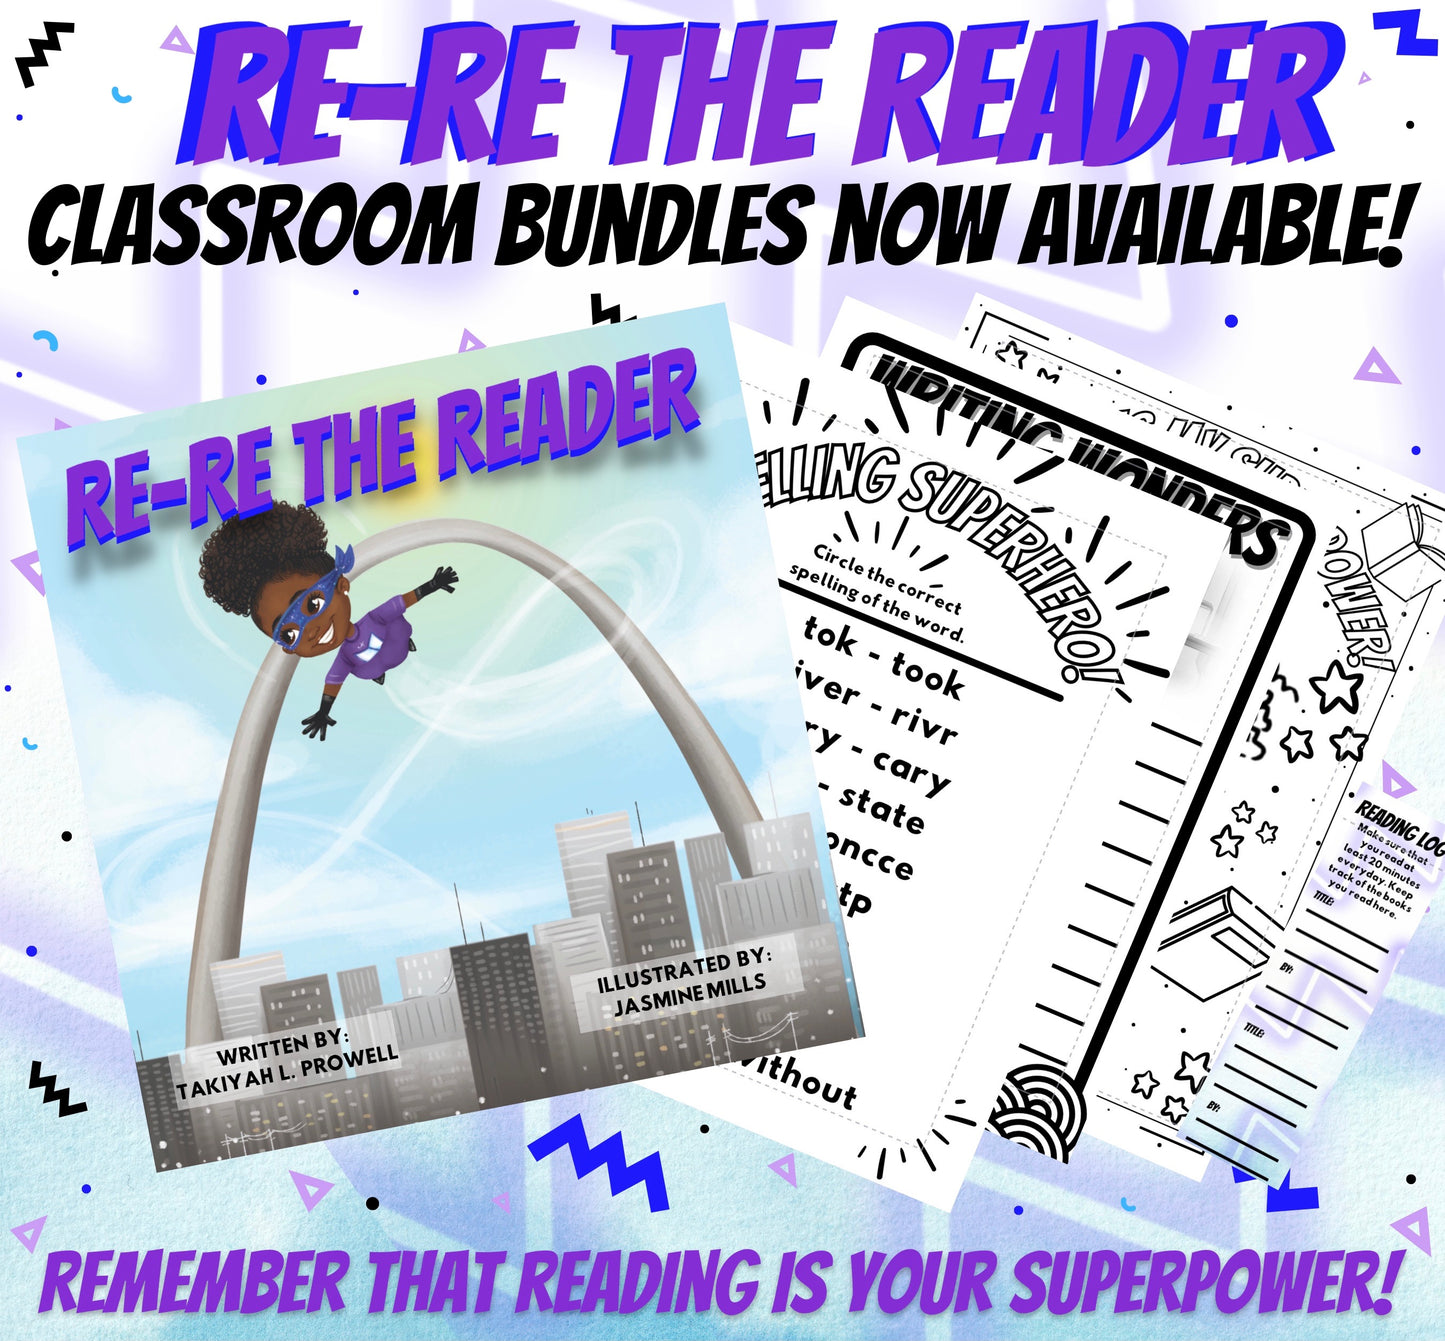 Classroom Bundle (100, Perfect for Multiple Classrooms)